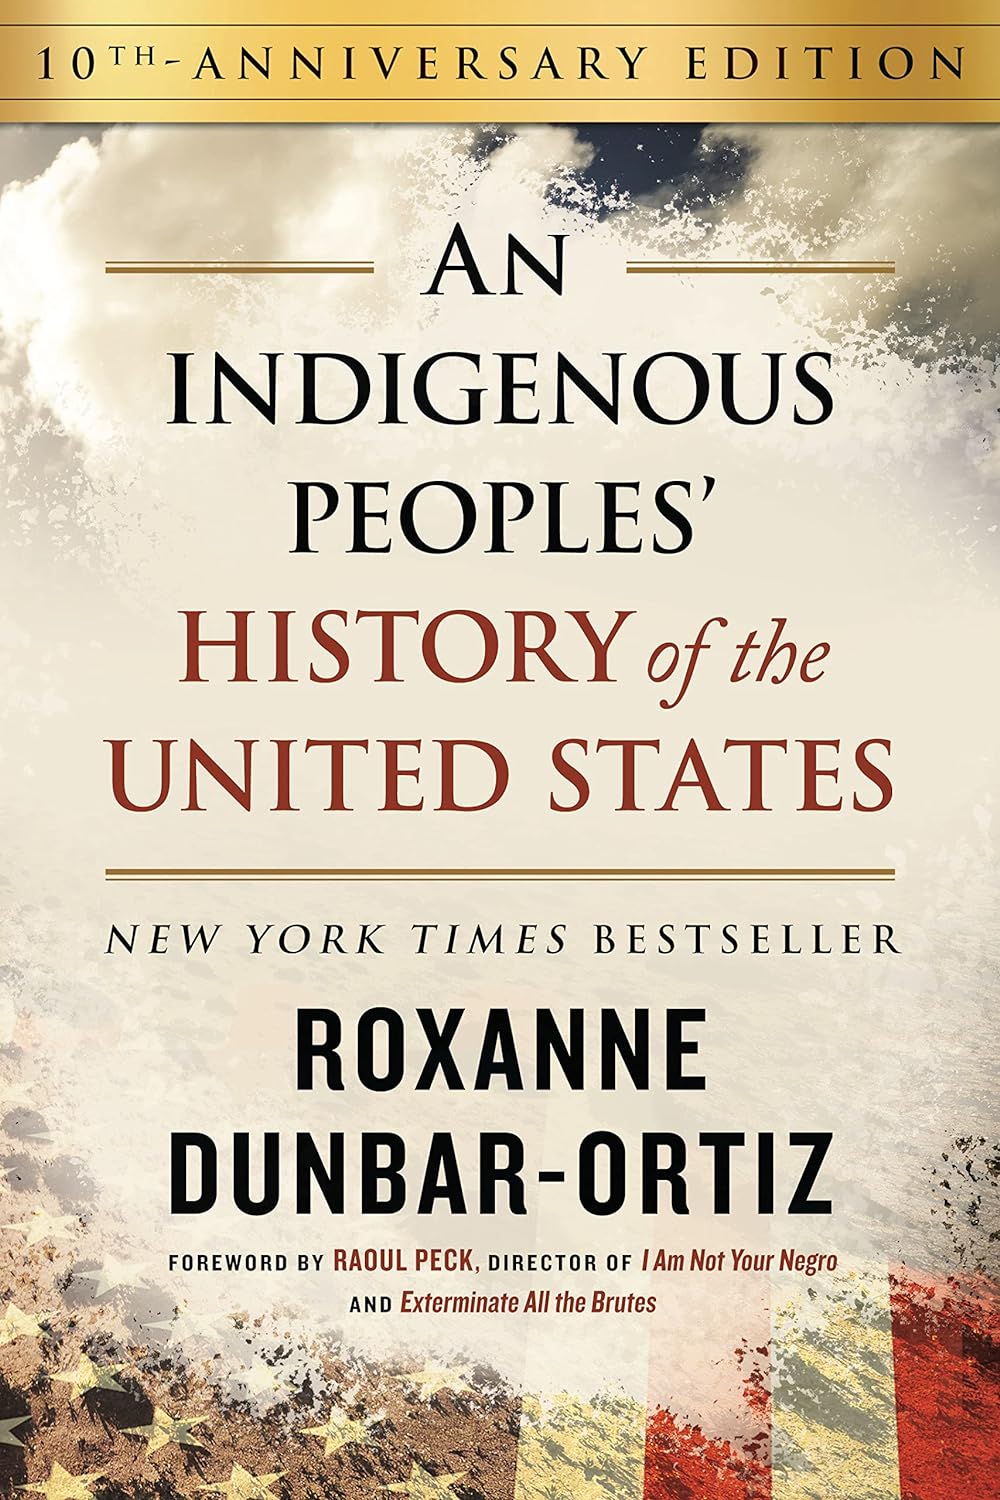 An Indigenous Peoples' History of the United States (10th Anniversary Edition) by Roxanne Dunbar-Ortiz